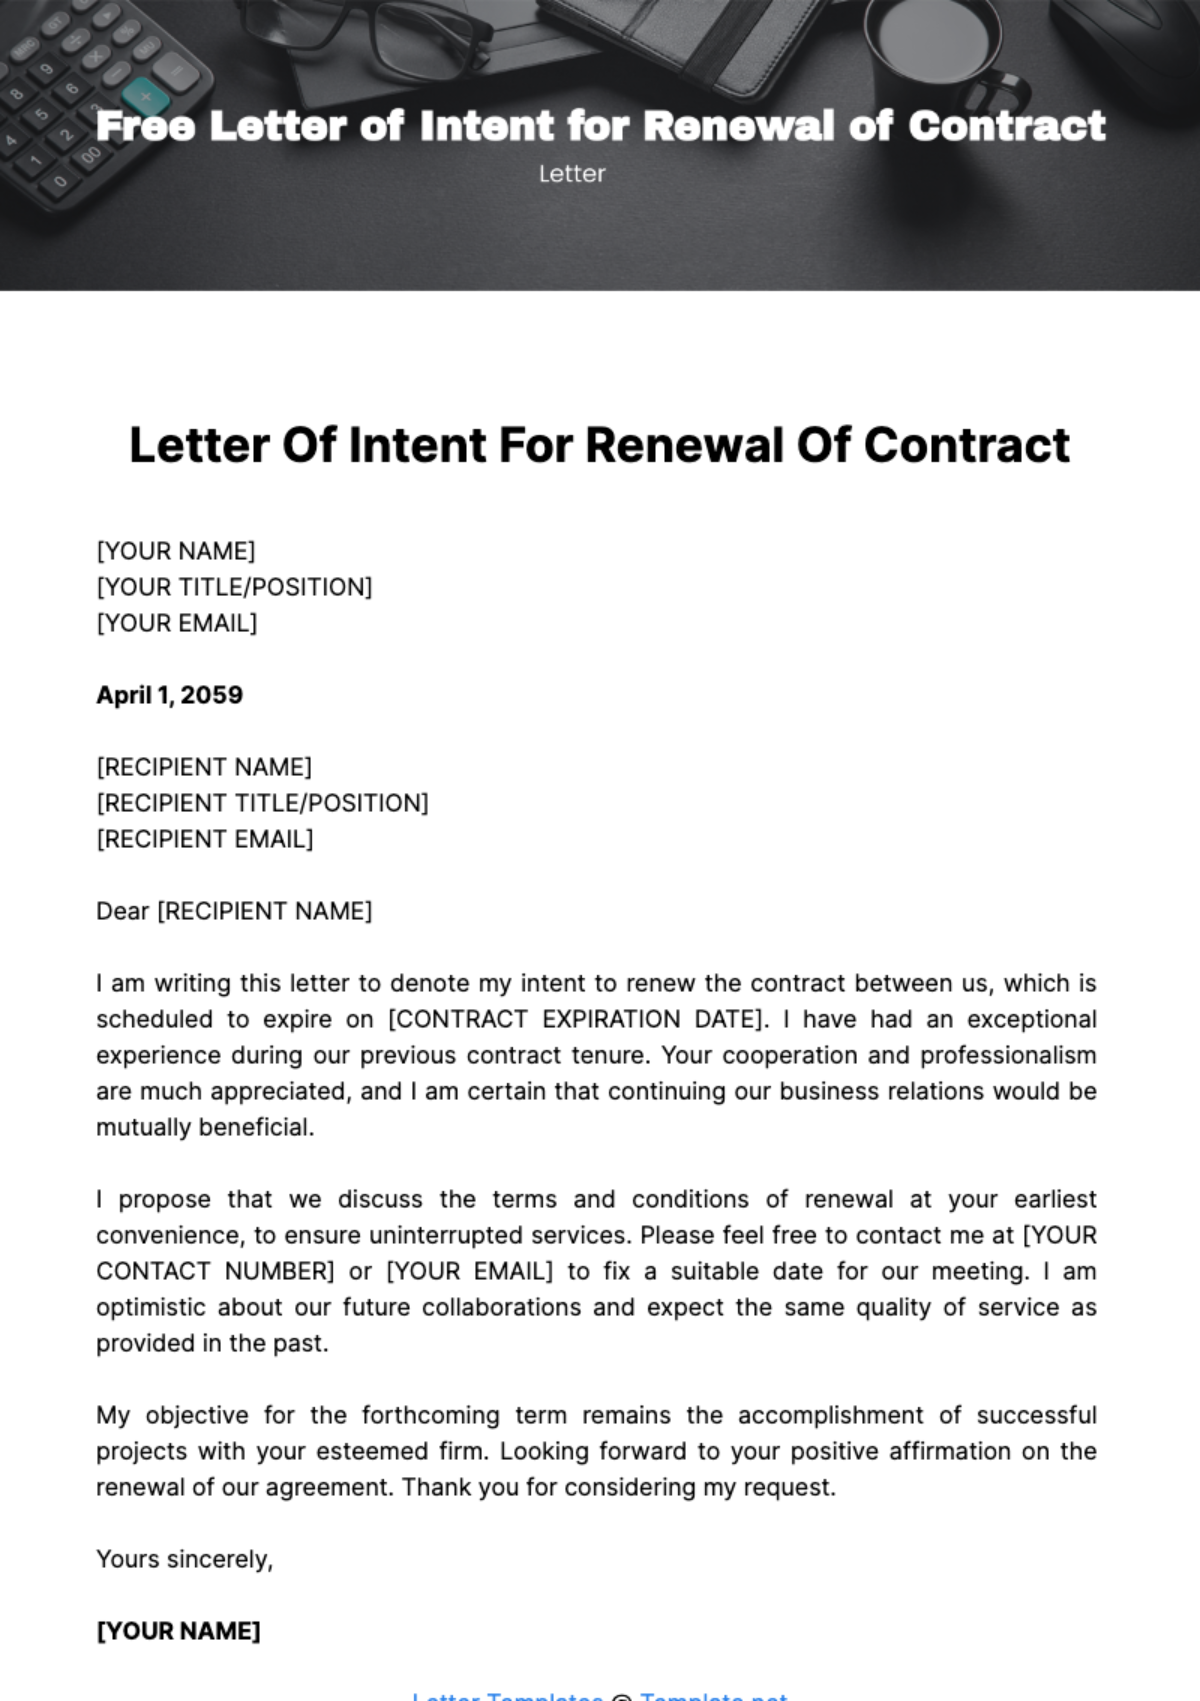 Letter of Intent for Renewal of Contract Template